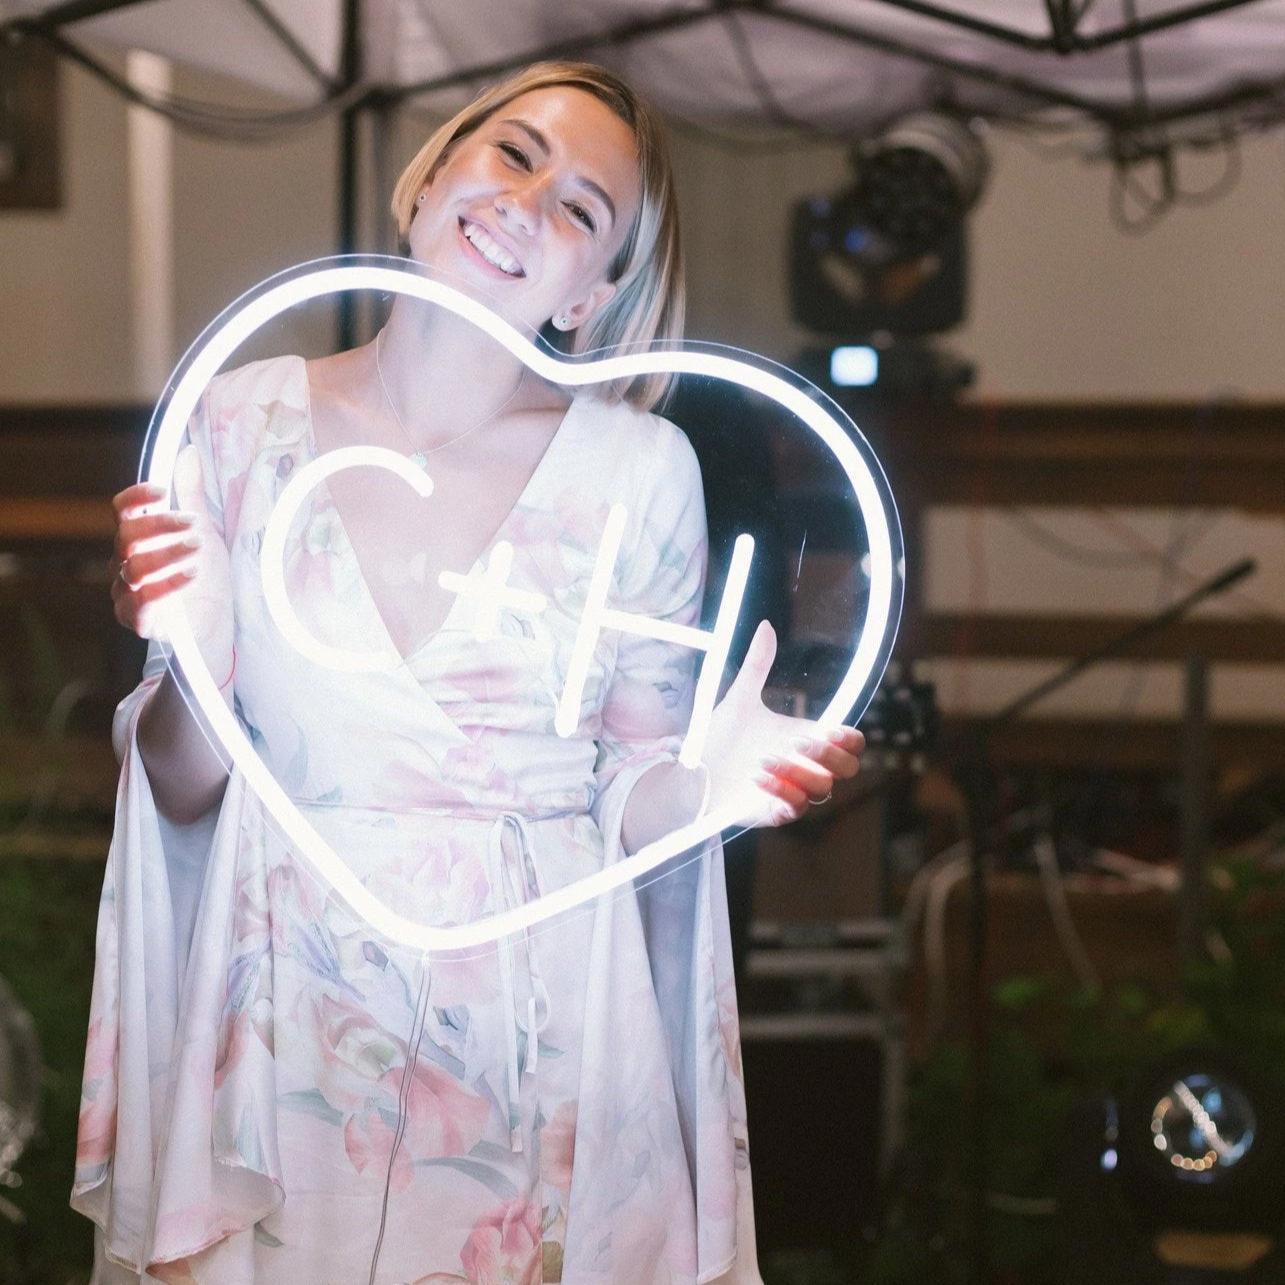 Heart Sign with Initials | NEON LED